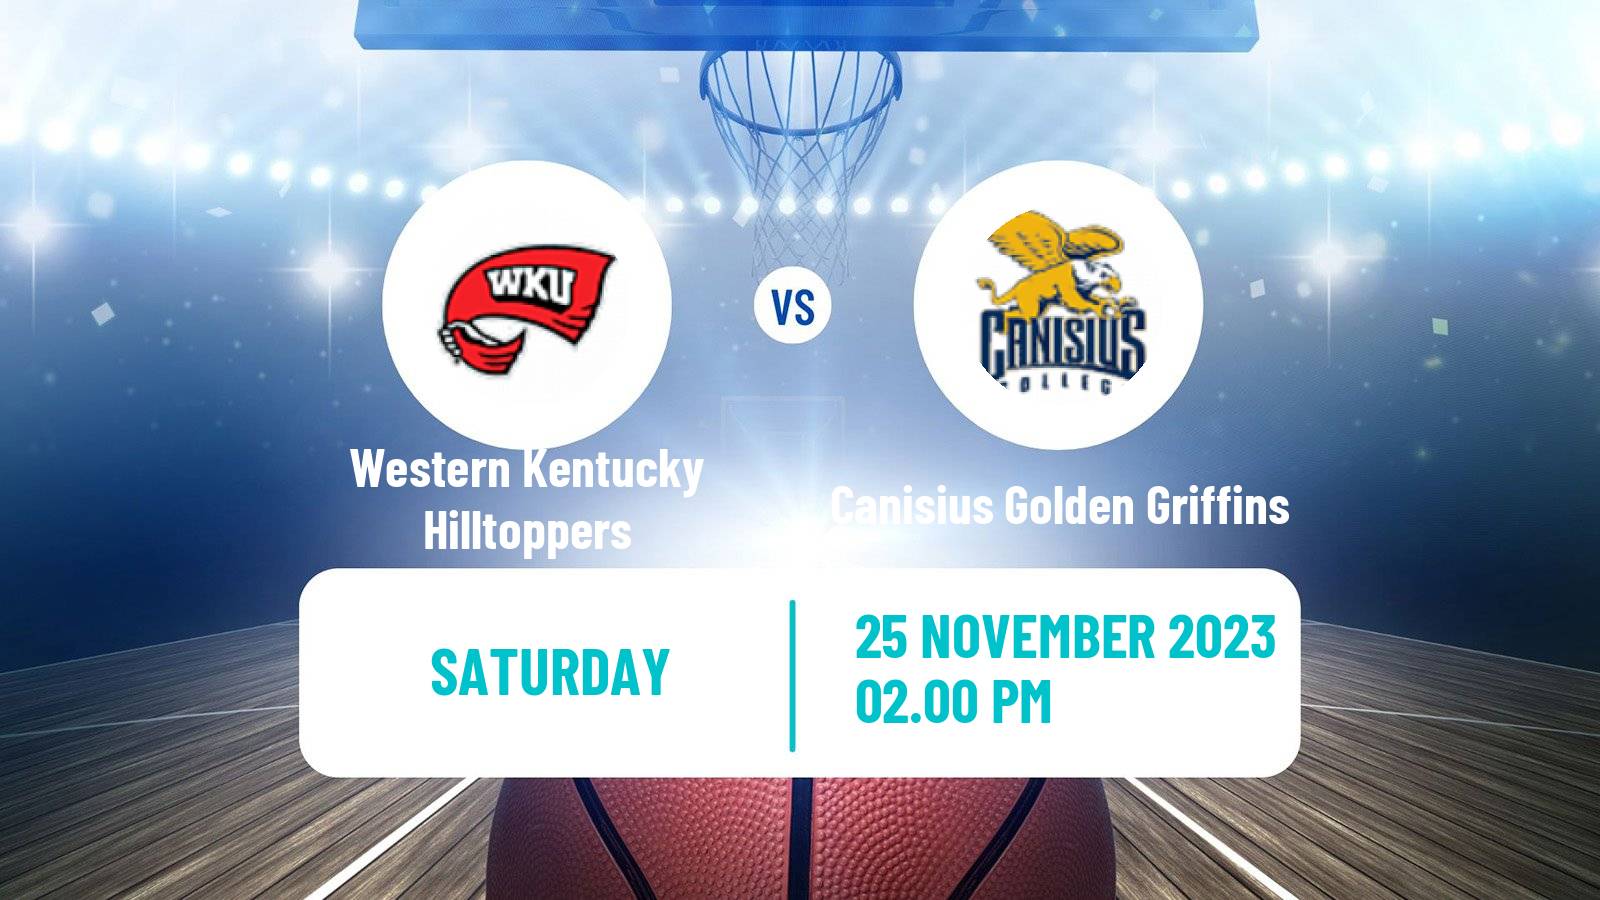 Basketball NCAA College Basketball Western Kentucky Hilltoppers - Canisius Golden Griffins